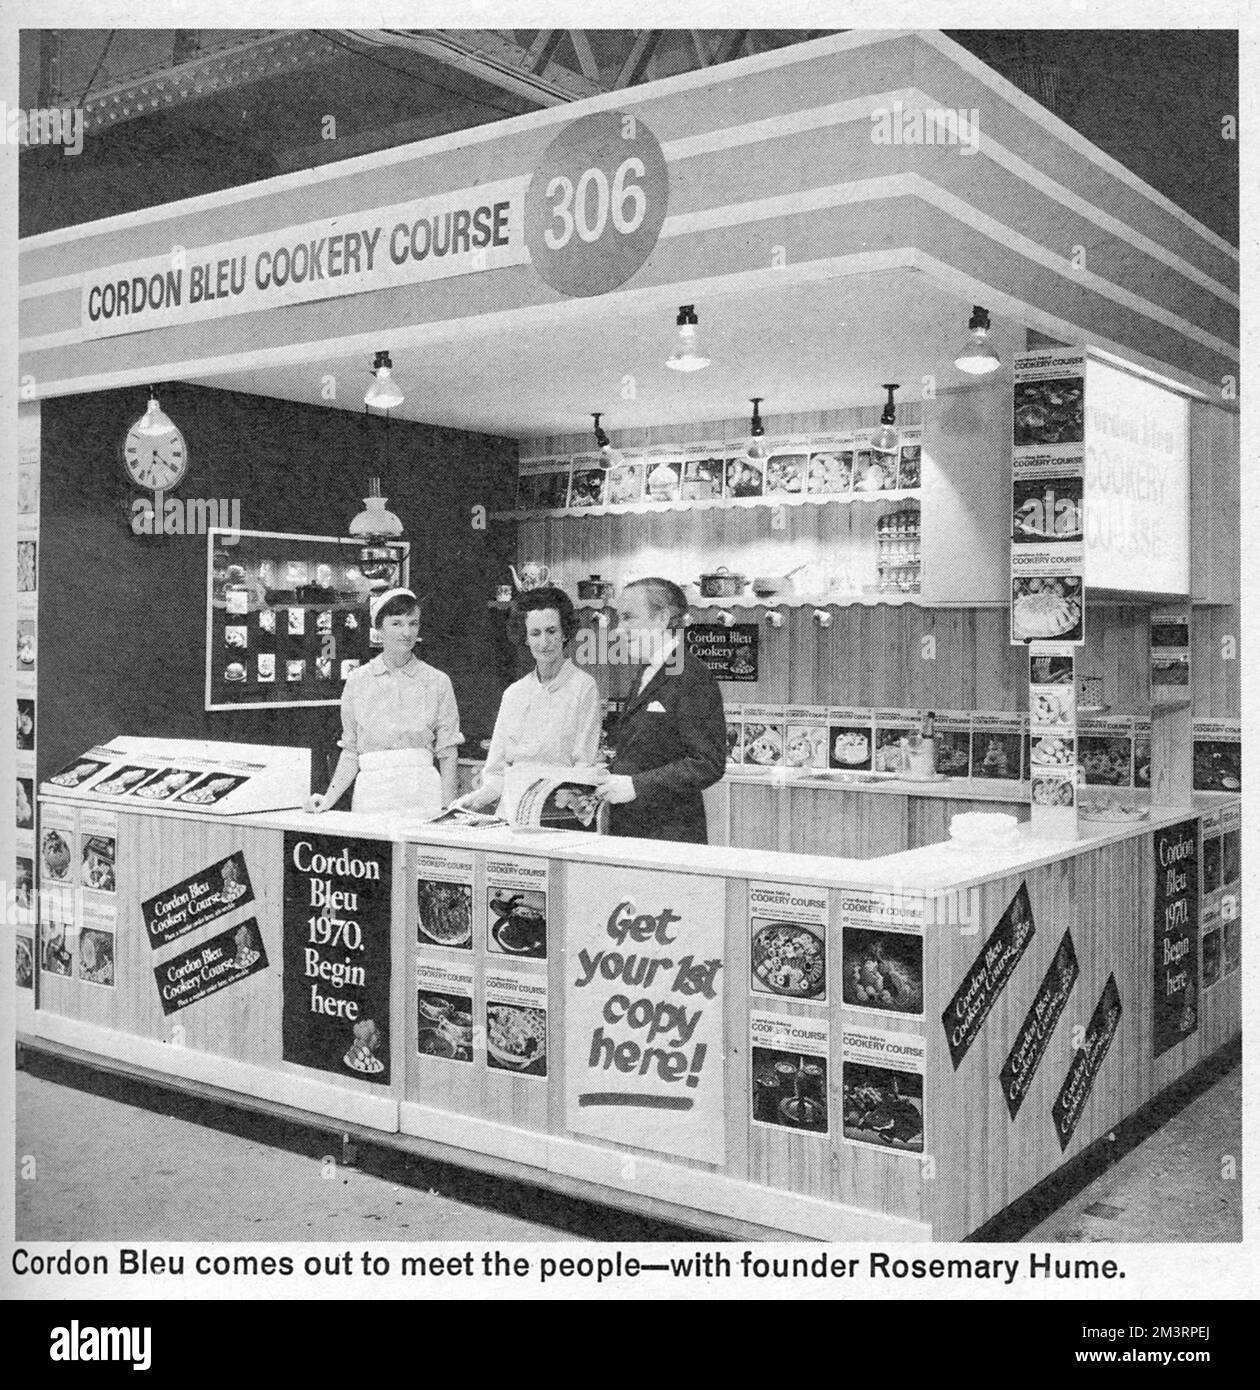 The Cordon Bleu School at a trade fair with it's founder, Rosemary Hume     Date: 1970 Stock Photo